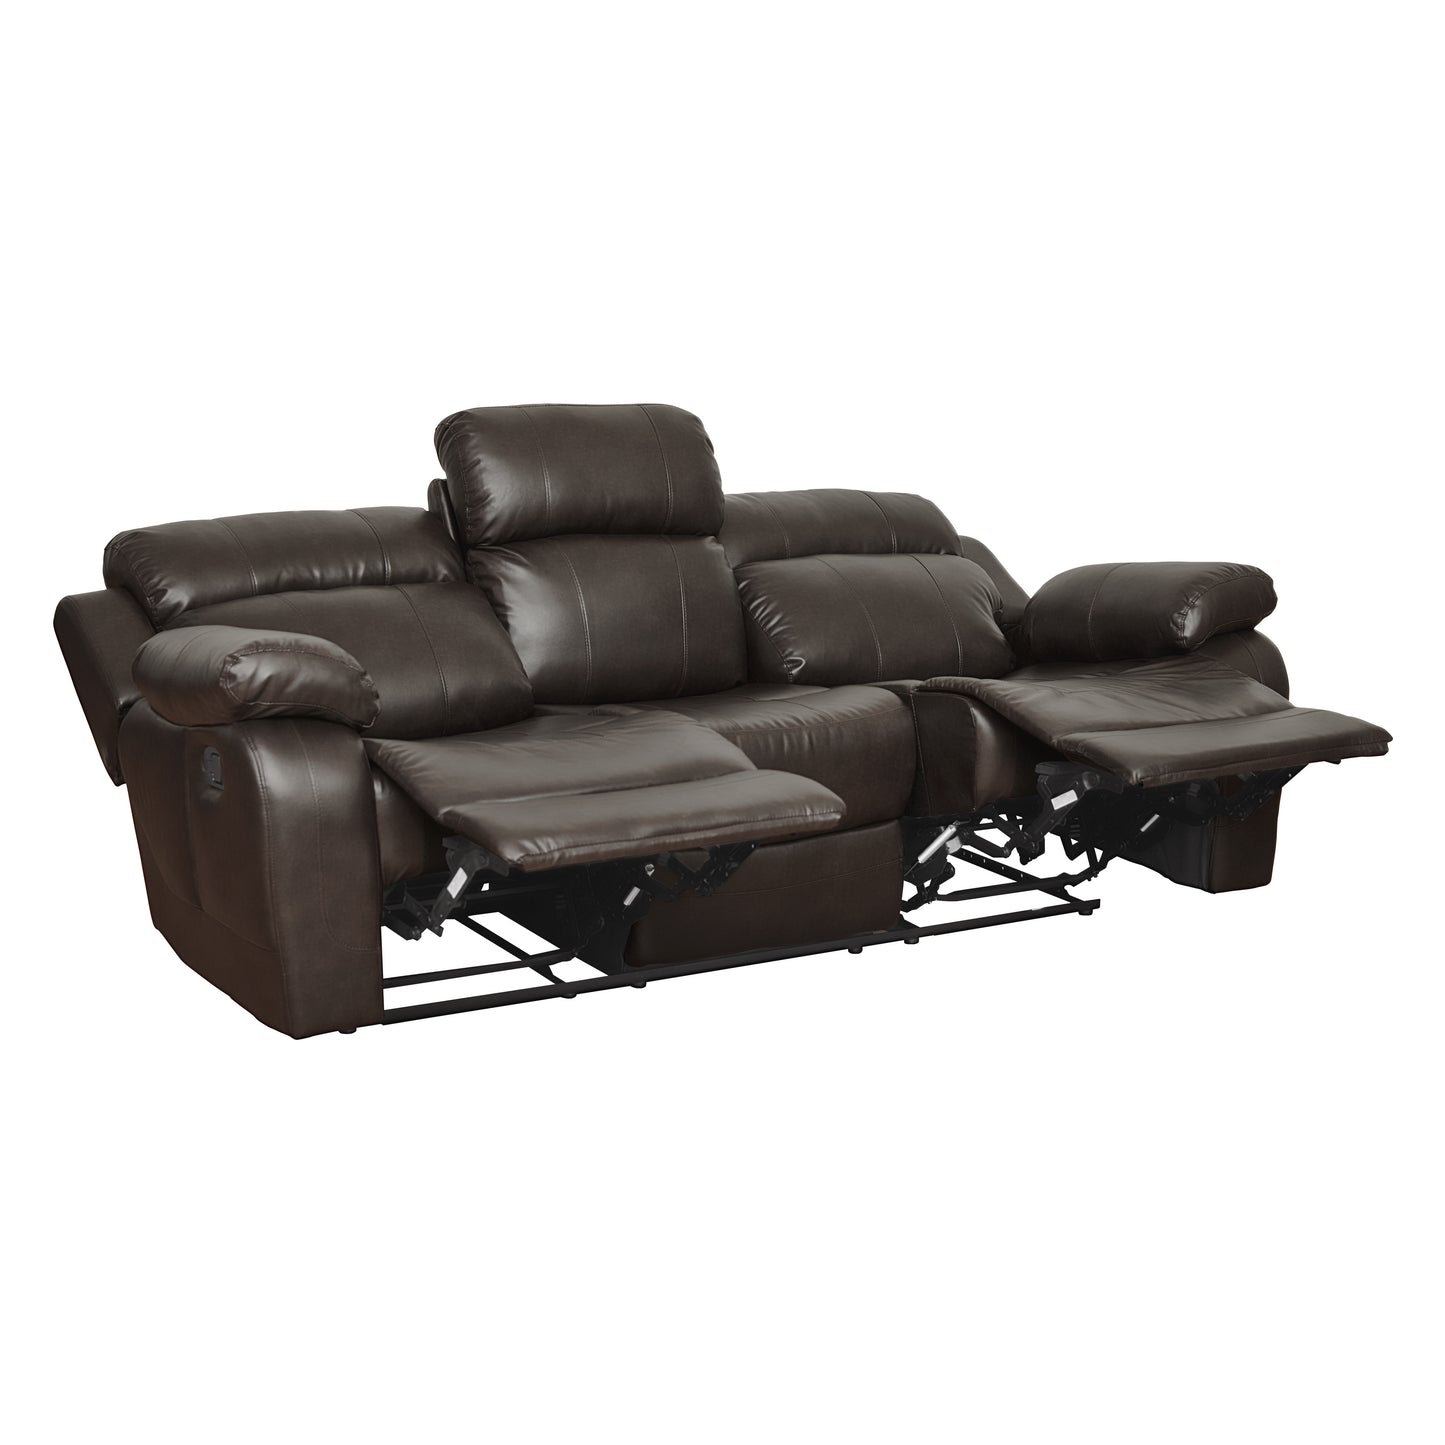 Contemporary Brown Faux Leather Upholstered 1pc Double Reclining Sofa w/ Center Drop-Down Cup Holder Living Room Furniture